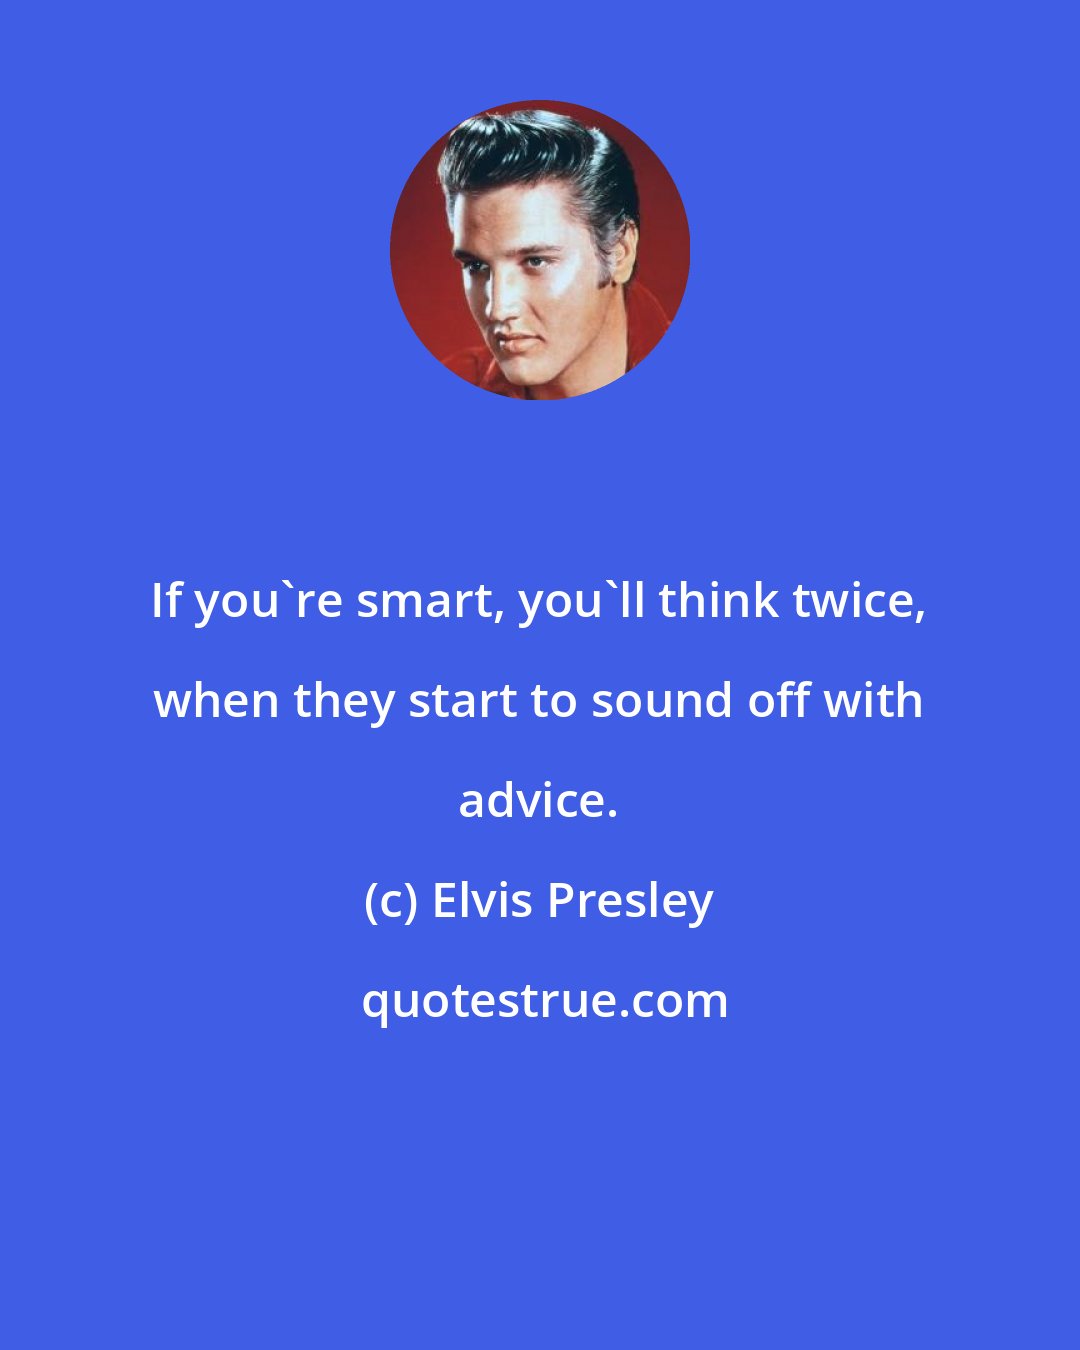 Elvis Presley: If you're smart, you'll think twice, when they start to sound off with advice.